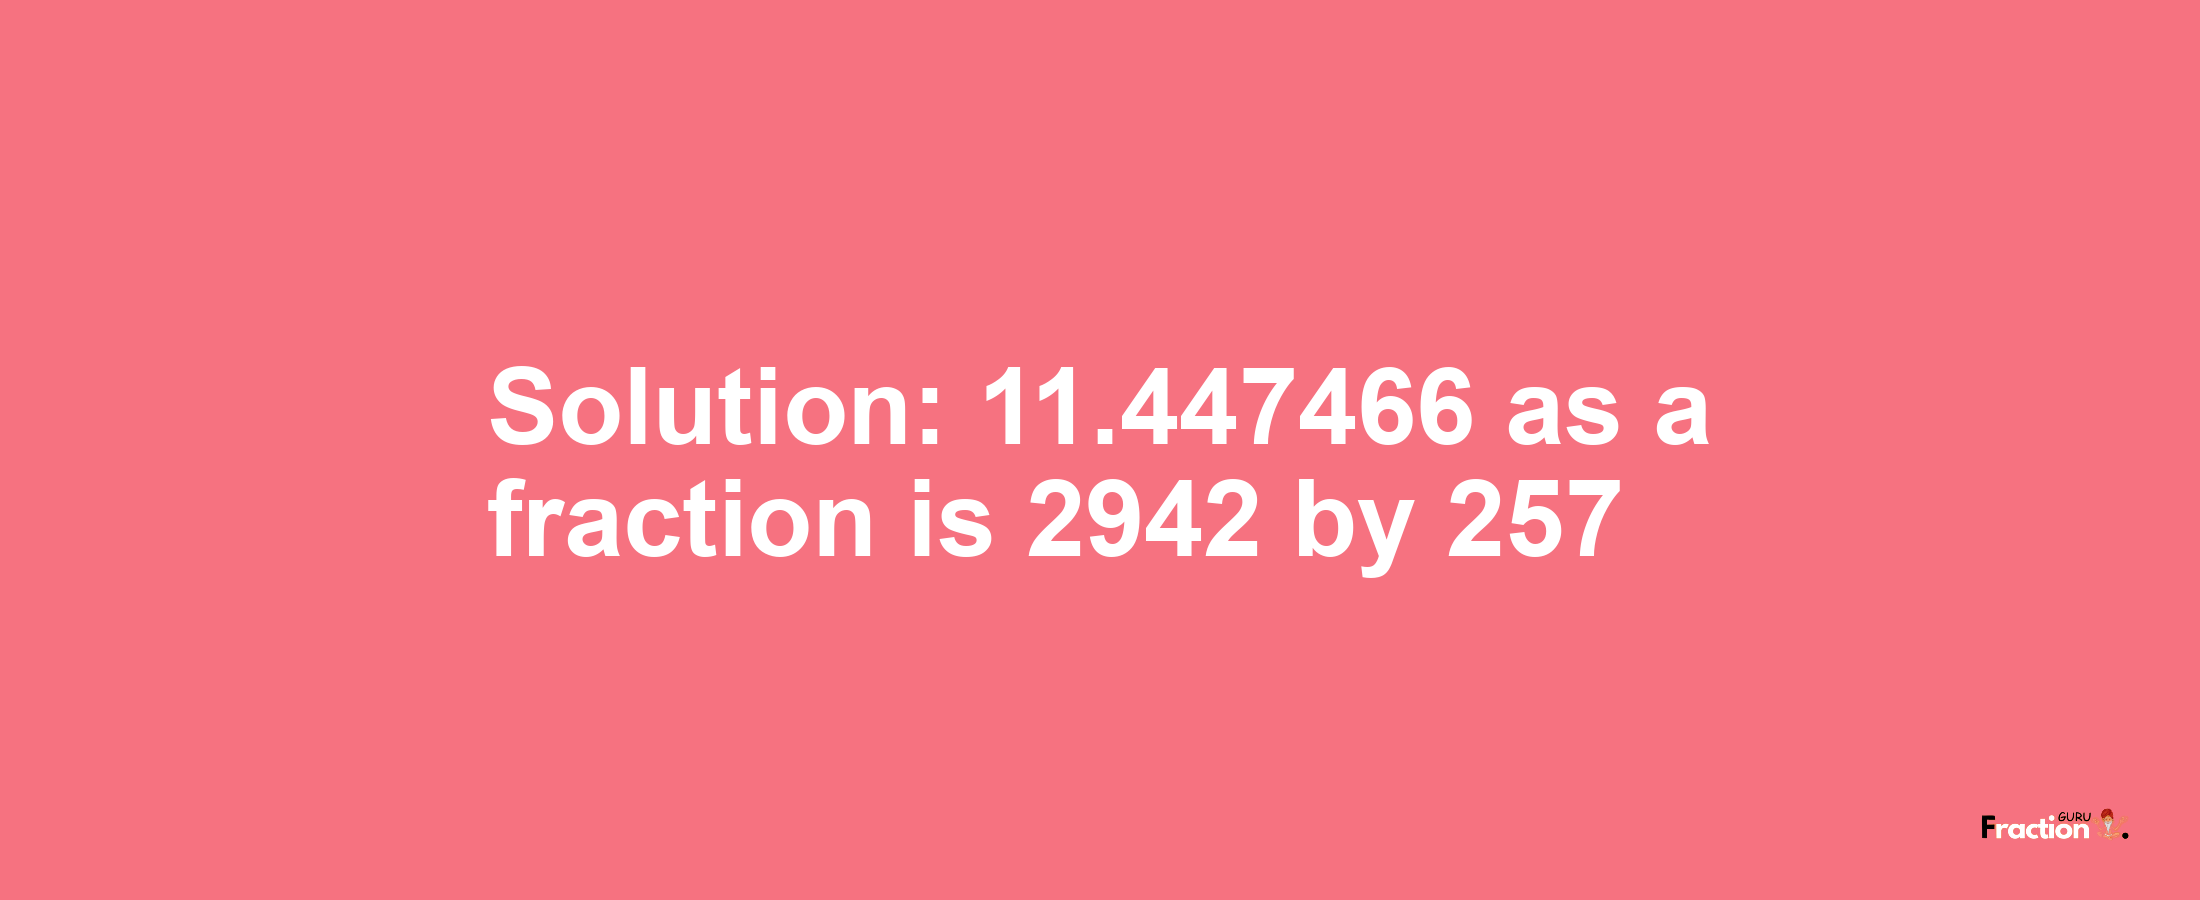 Solution:11.447466 as a fraction is 2942/257